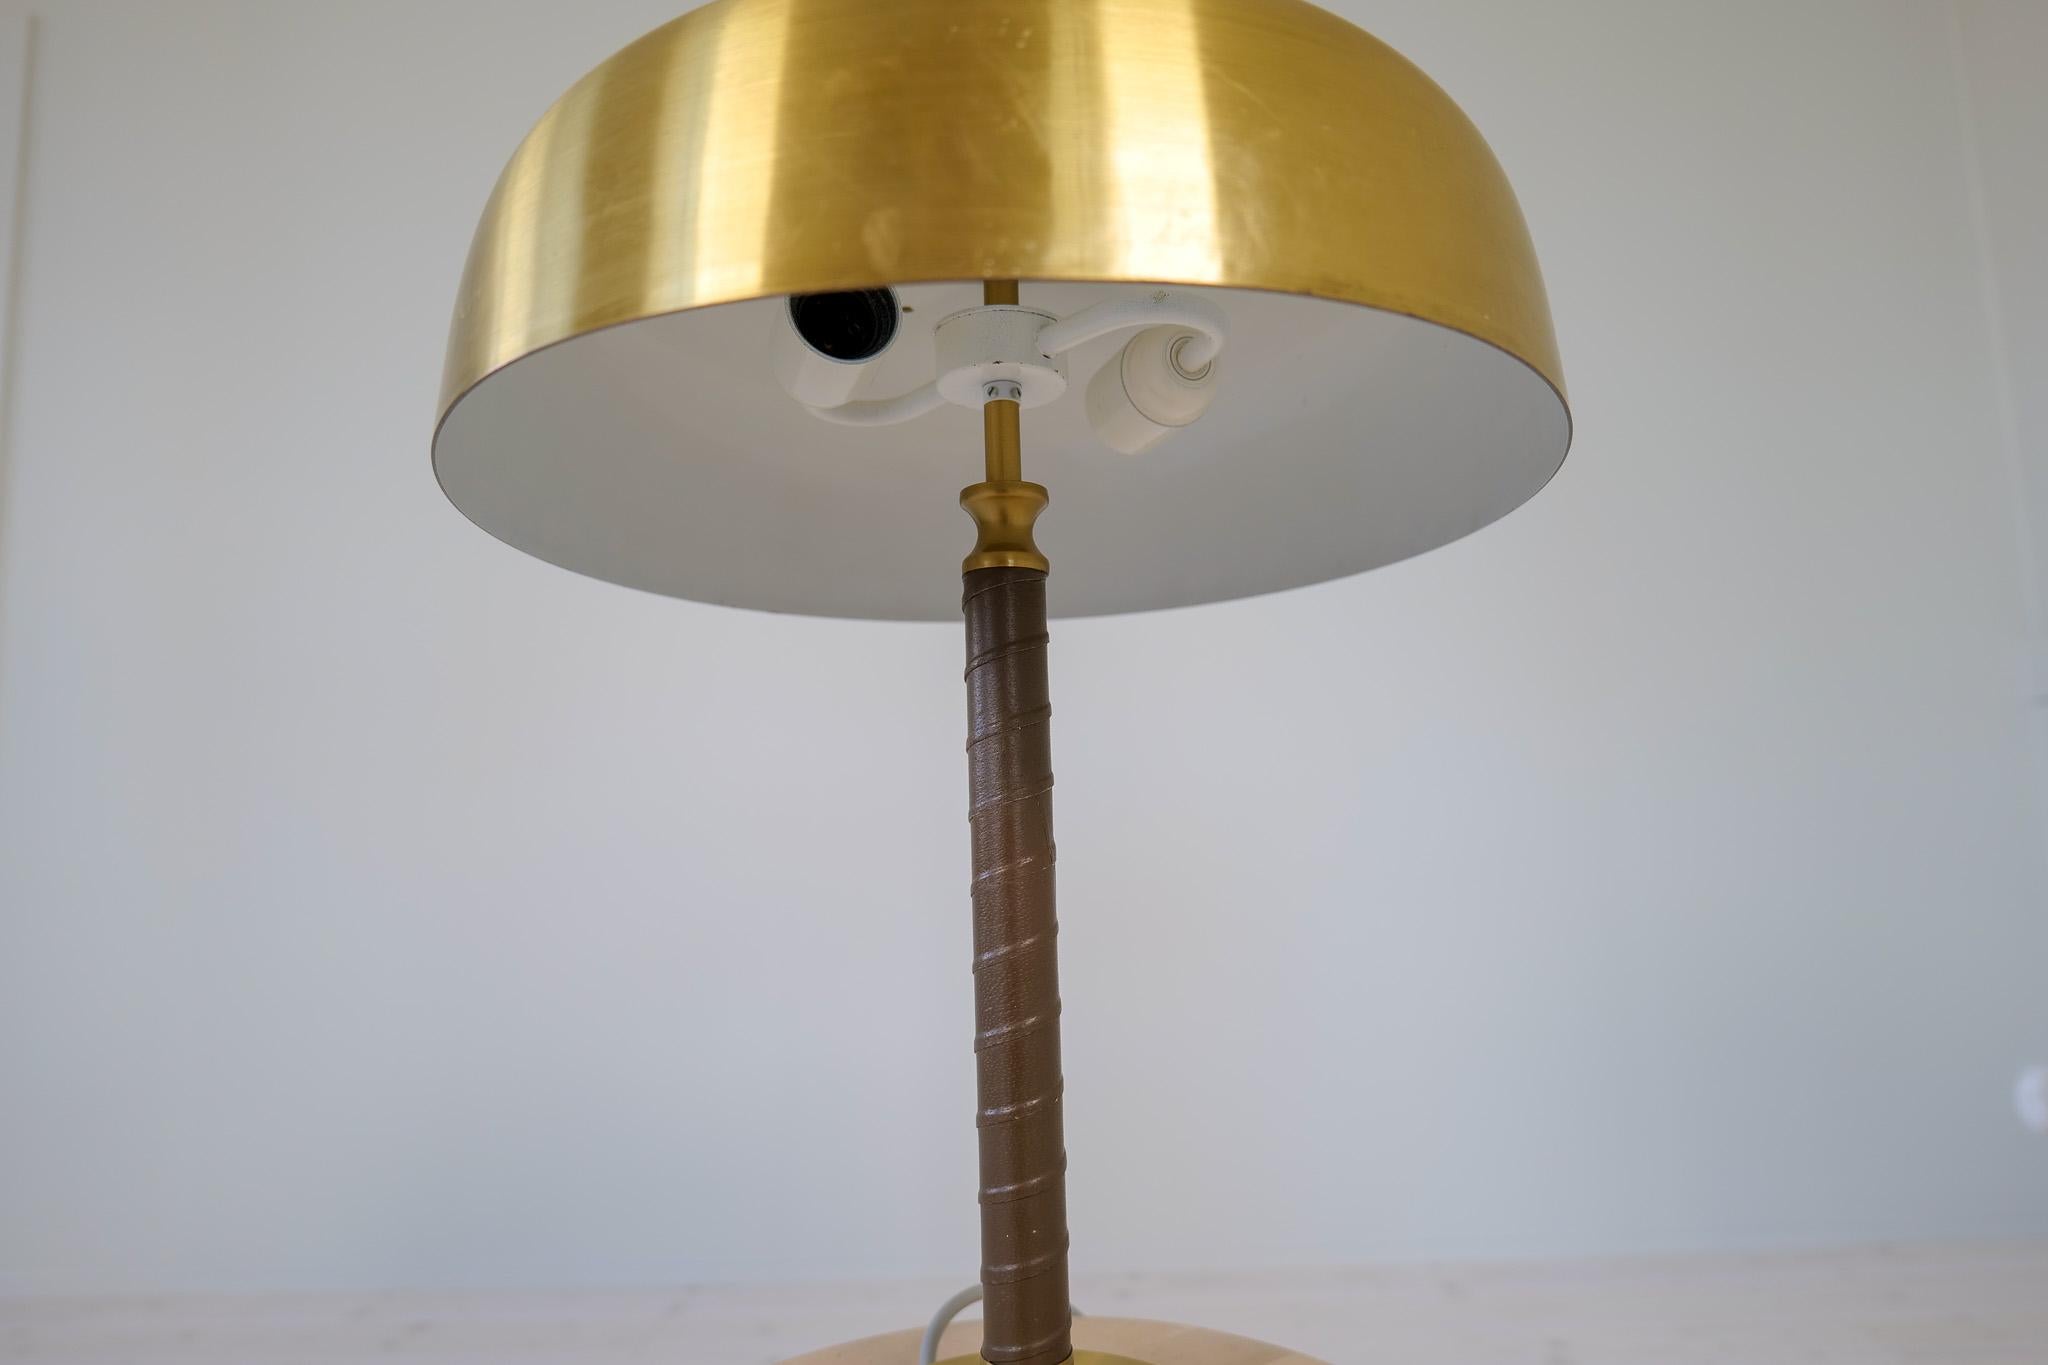 Metal Midcentury Modern Table Lamp in Brass and Leather by Boréns, Sweden, 1960s For Sale